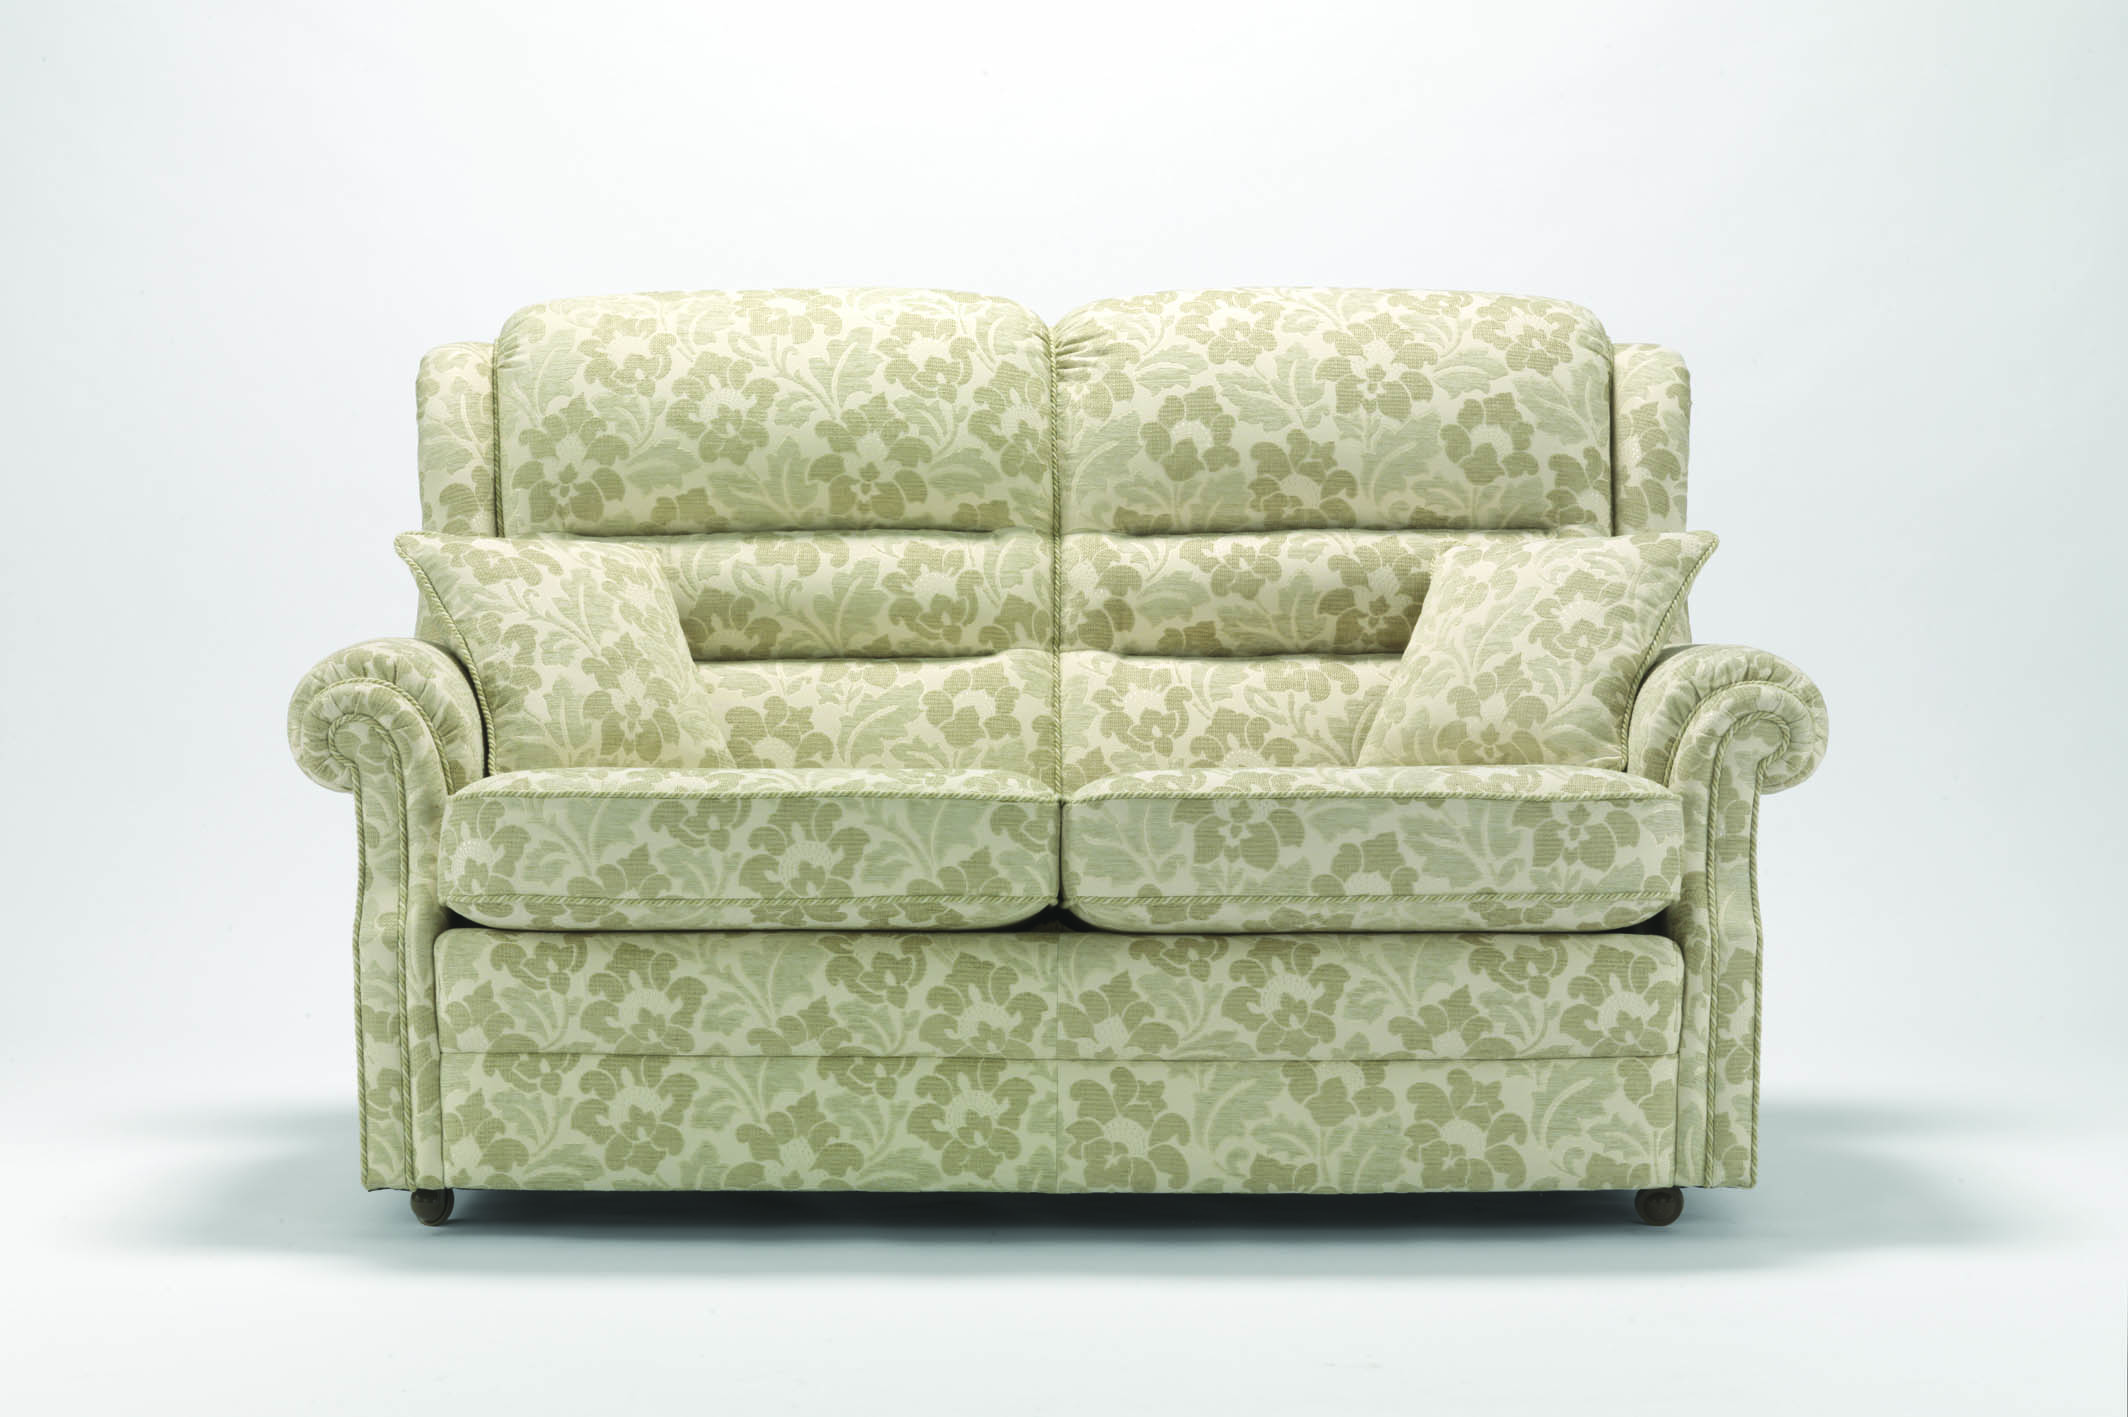 VALE LINCOLN 2 SEATER SOFA